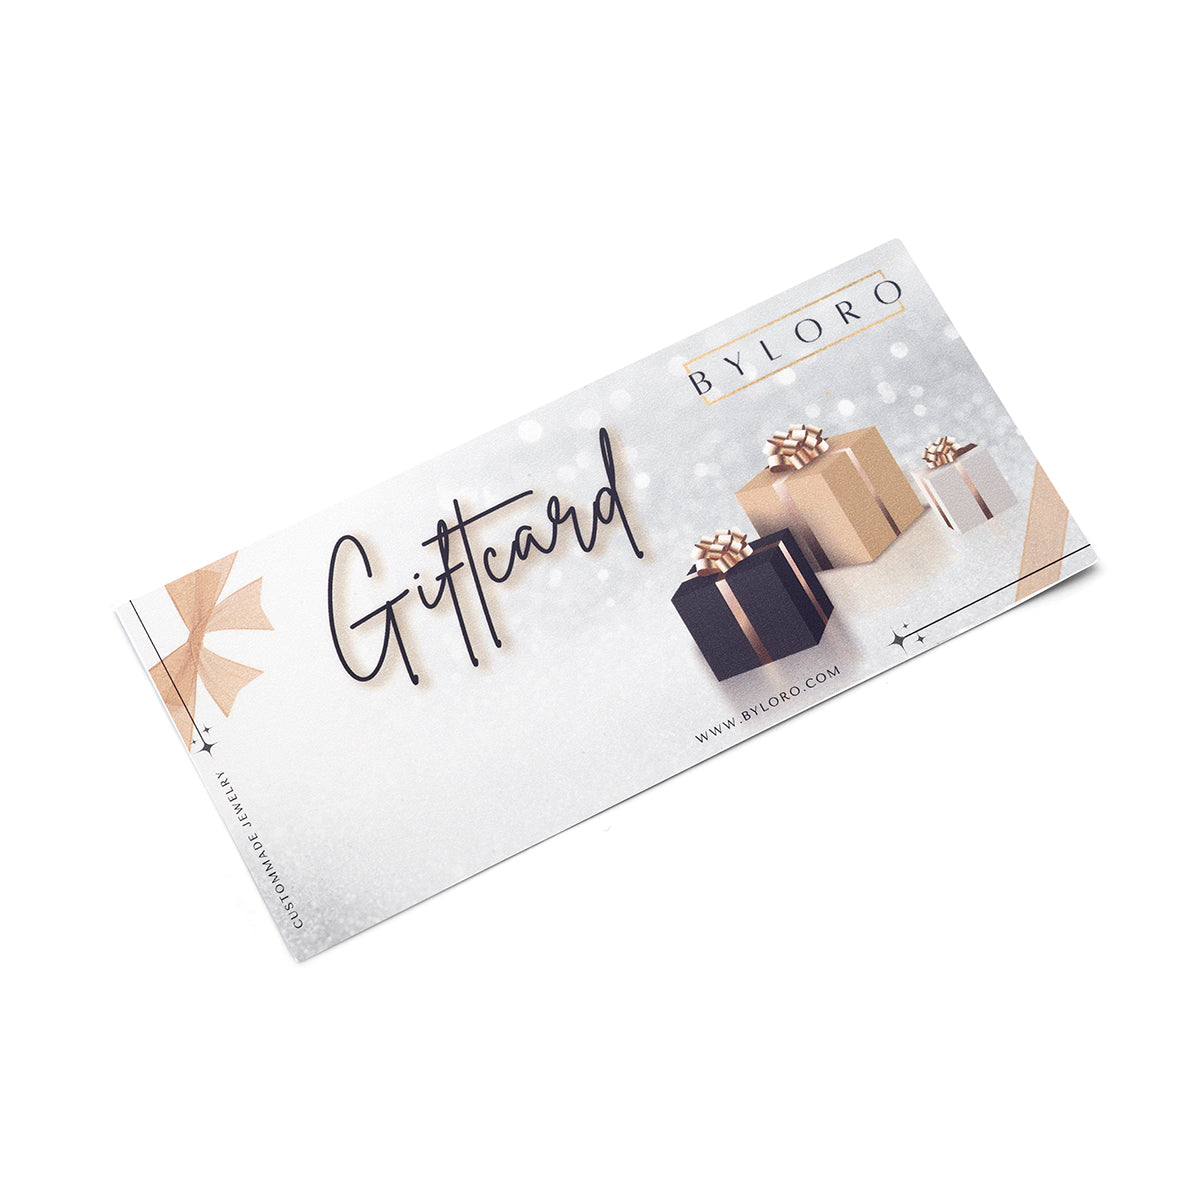 Byloro Gift Card